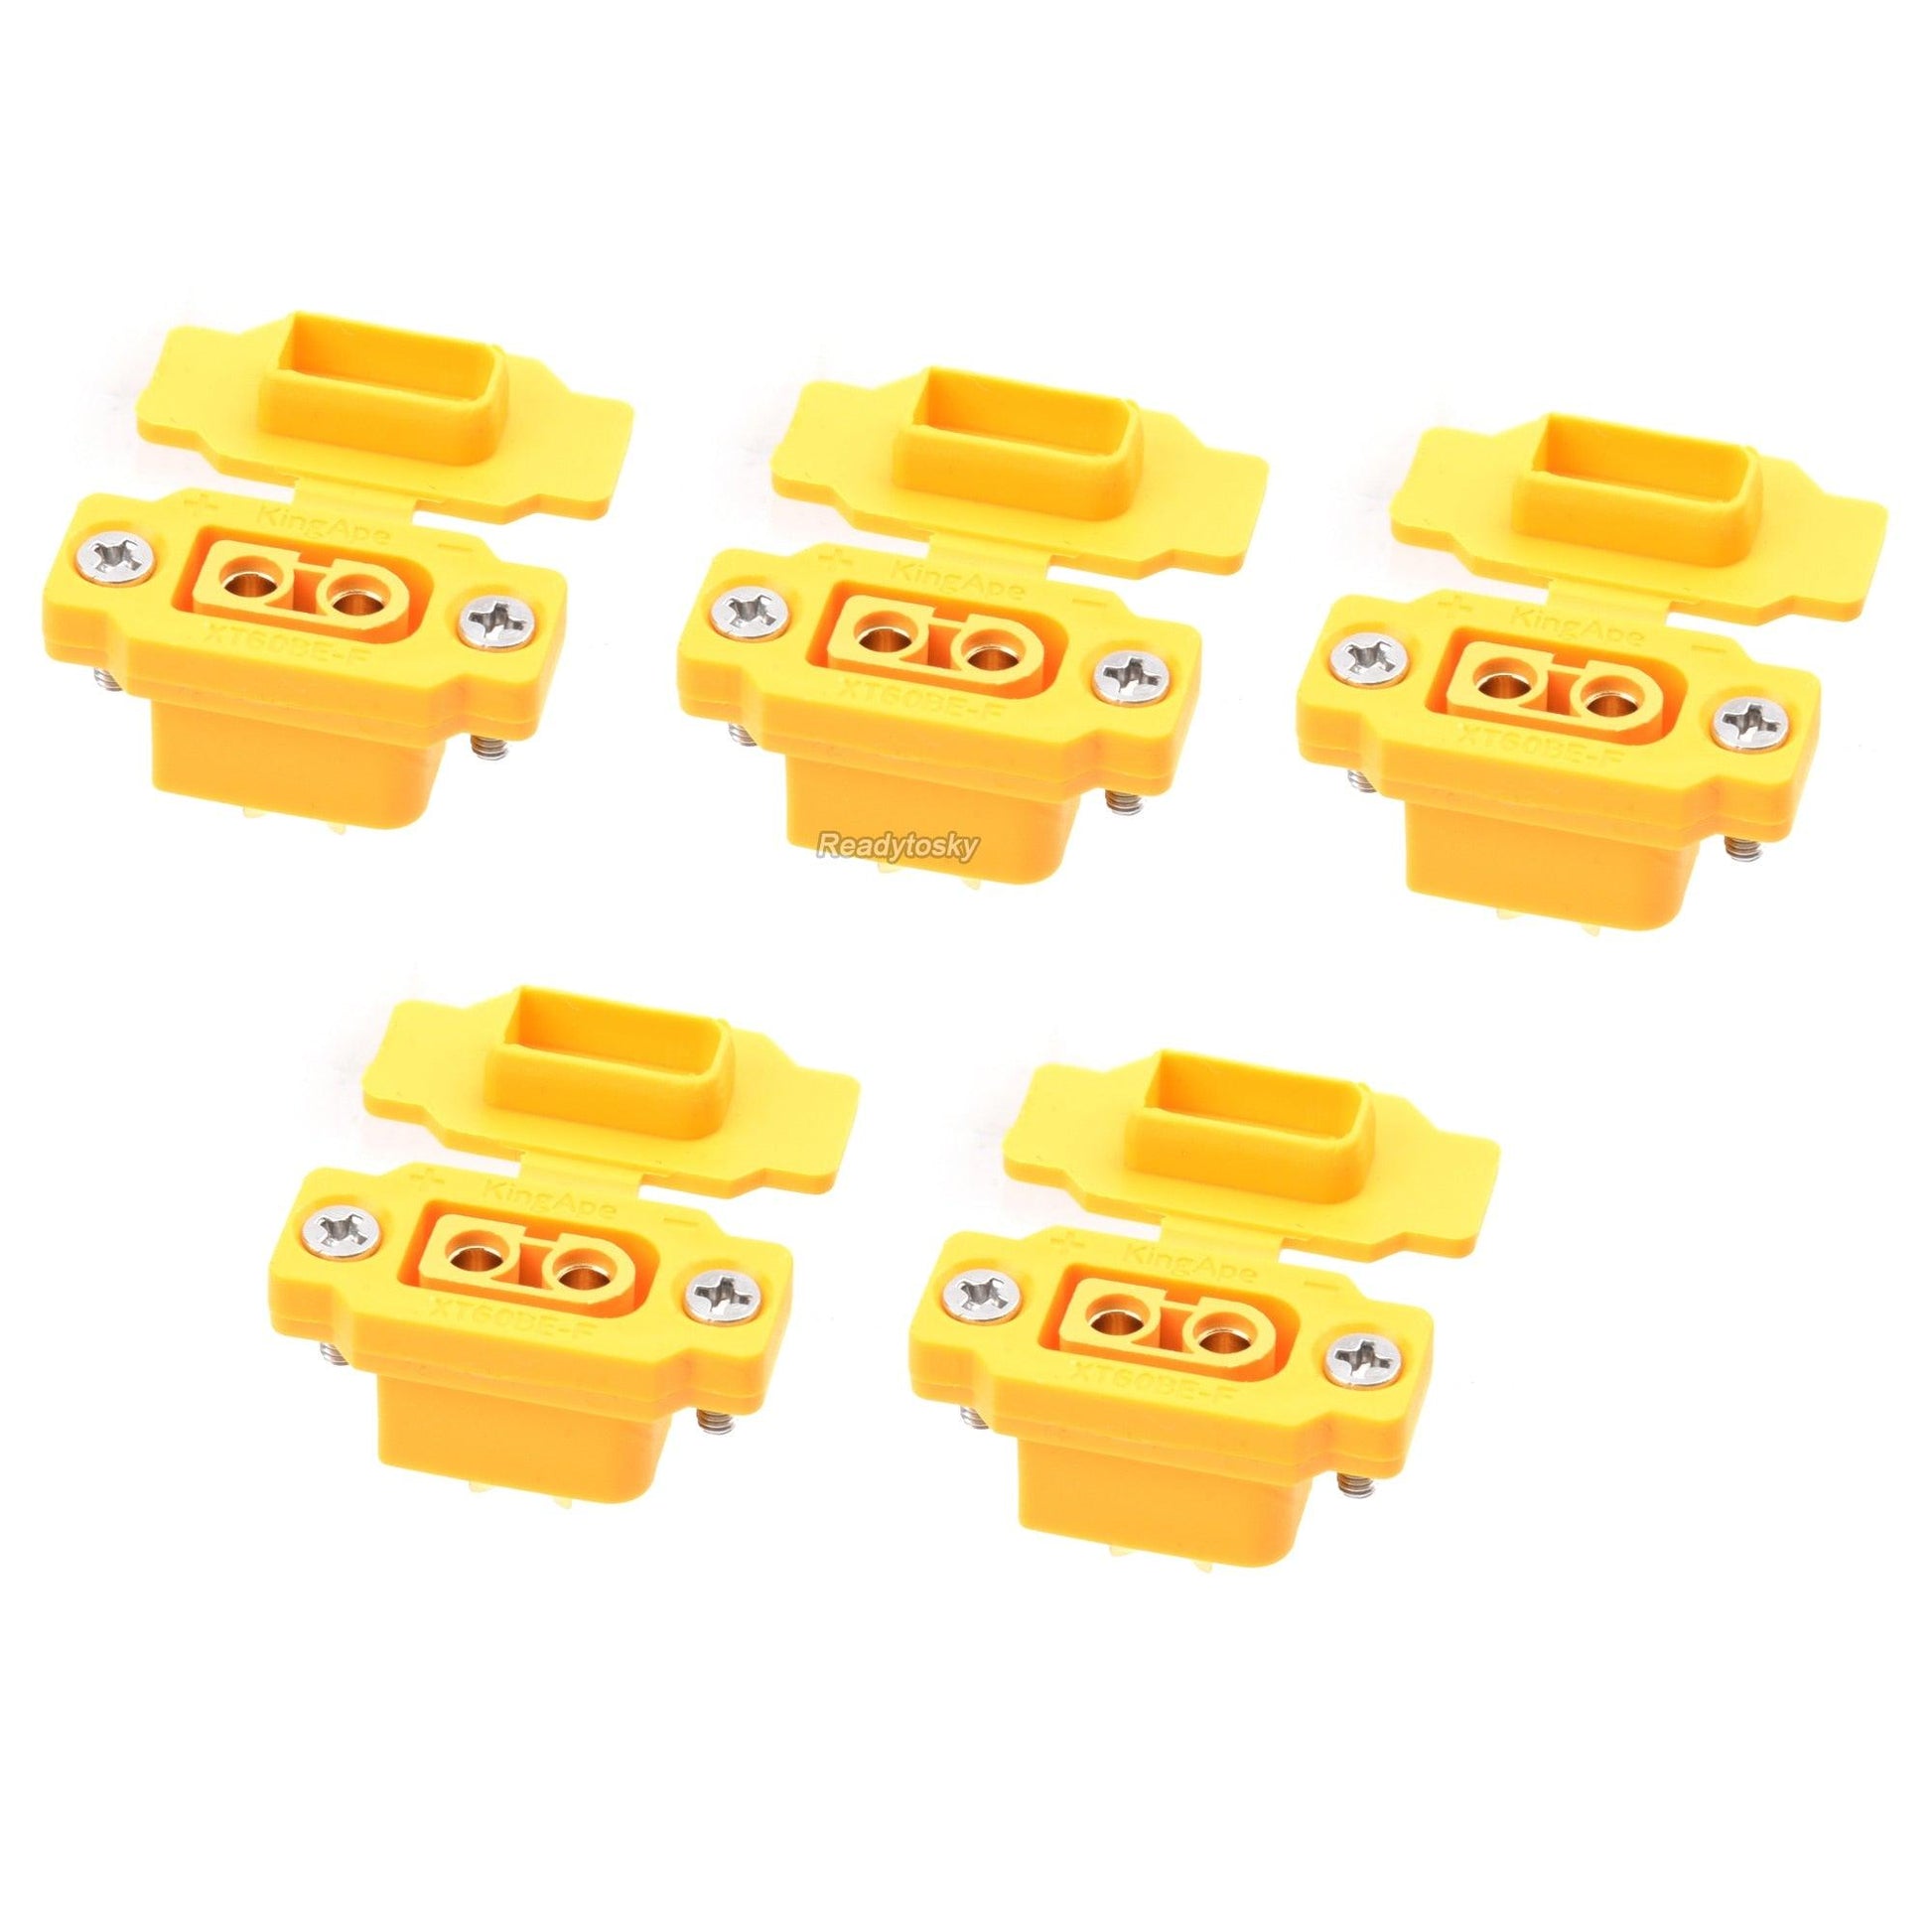 XT60 Plug Connector - NEW XT60BE-F XT60E-F & XT60 / XT60H Model Airplane Battery Gold-Plated 30A High Current Safe Female Plug Connector FPV Accessories - RCDrone